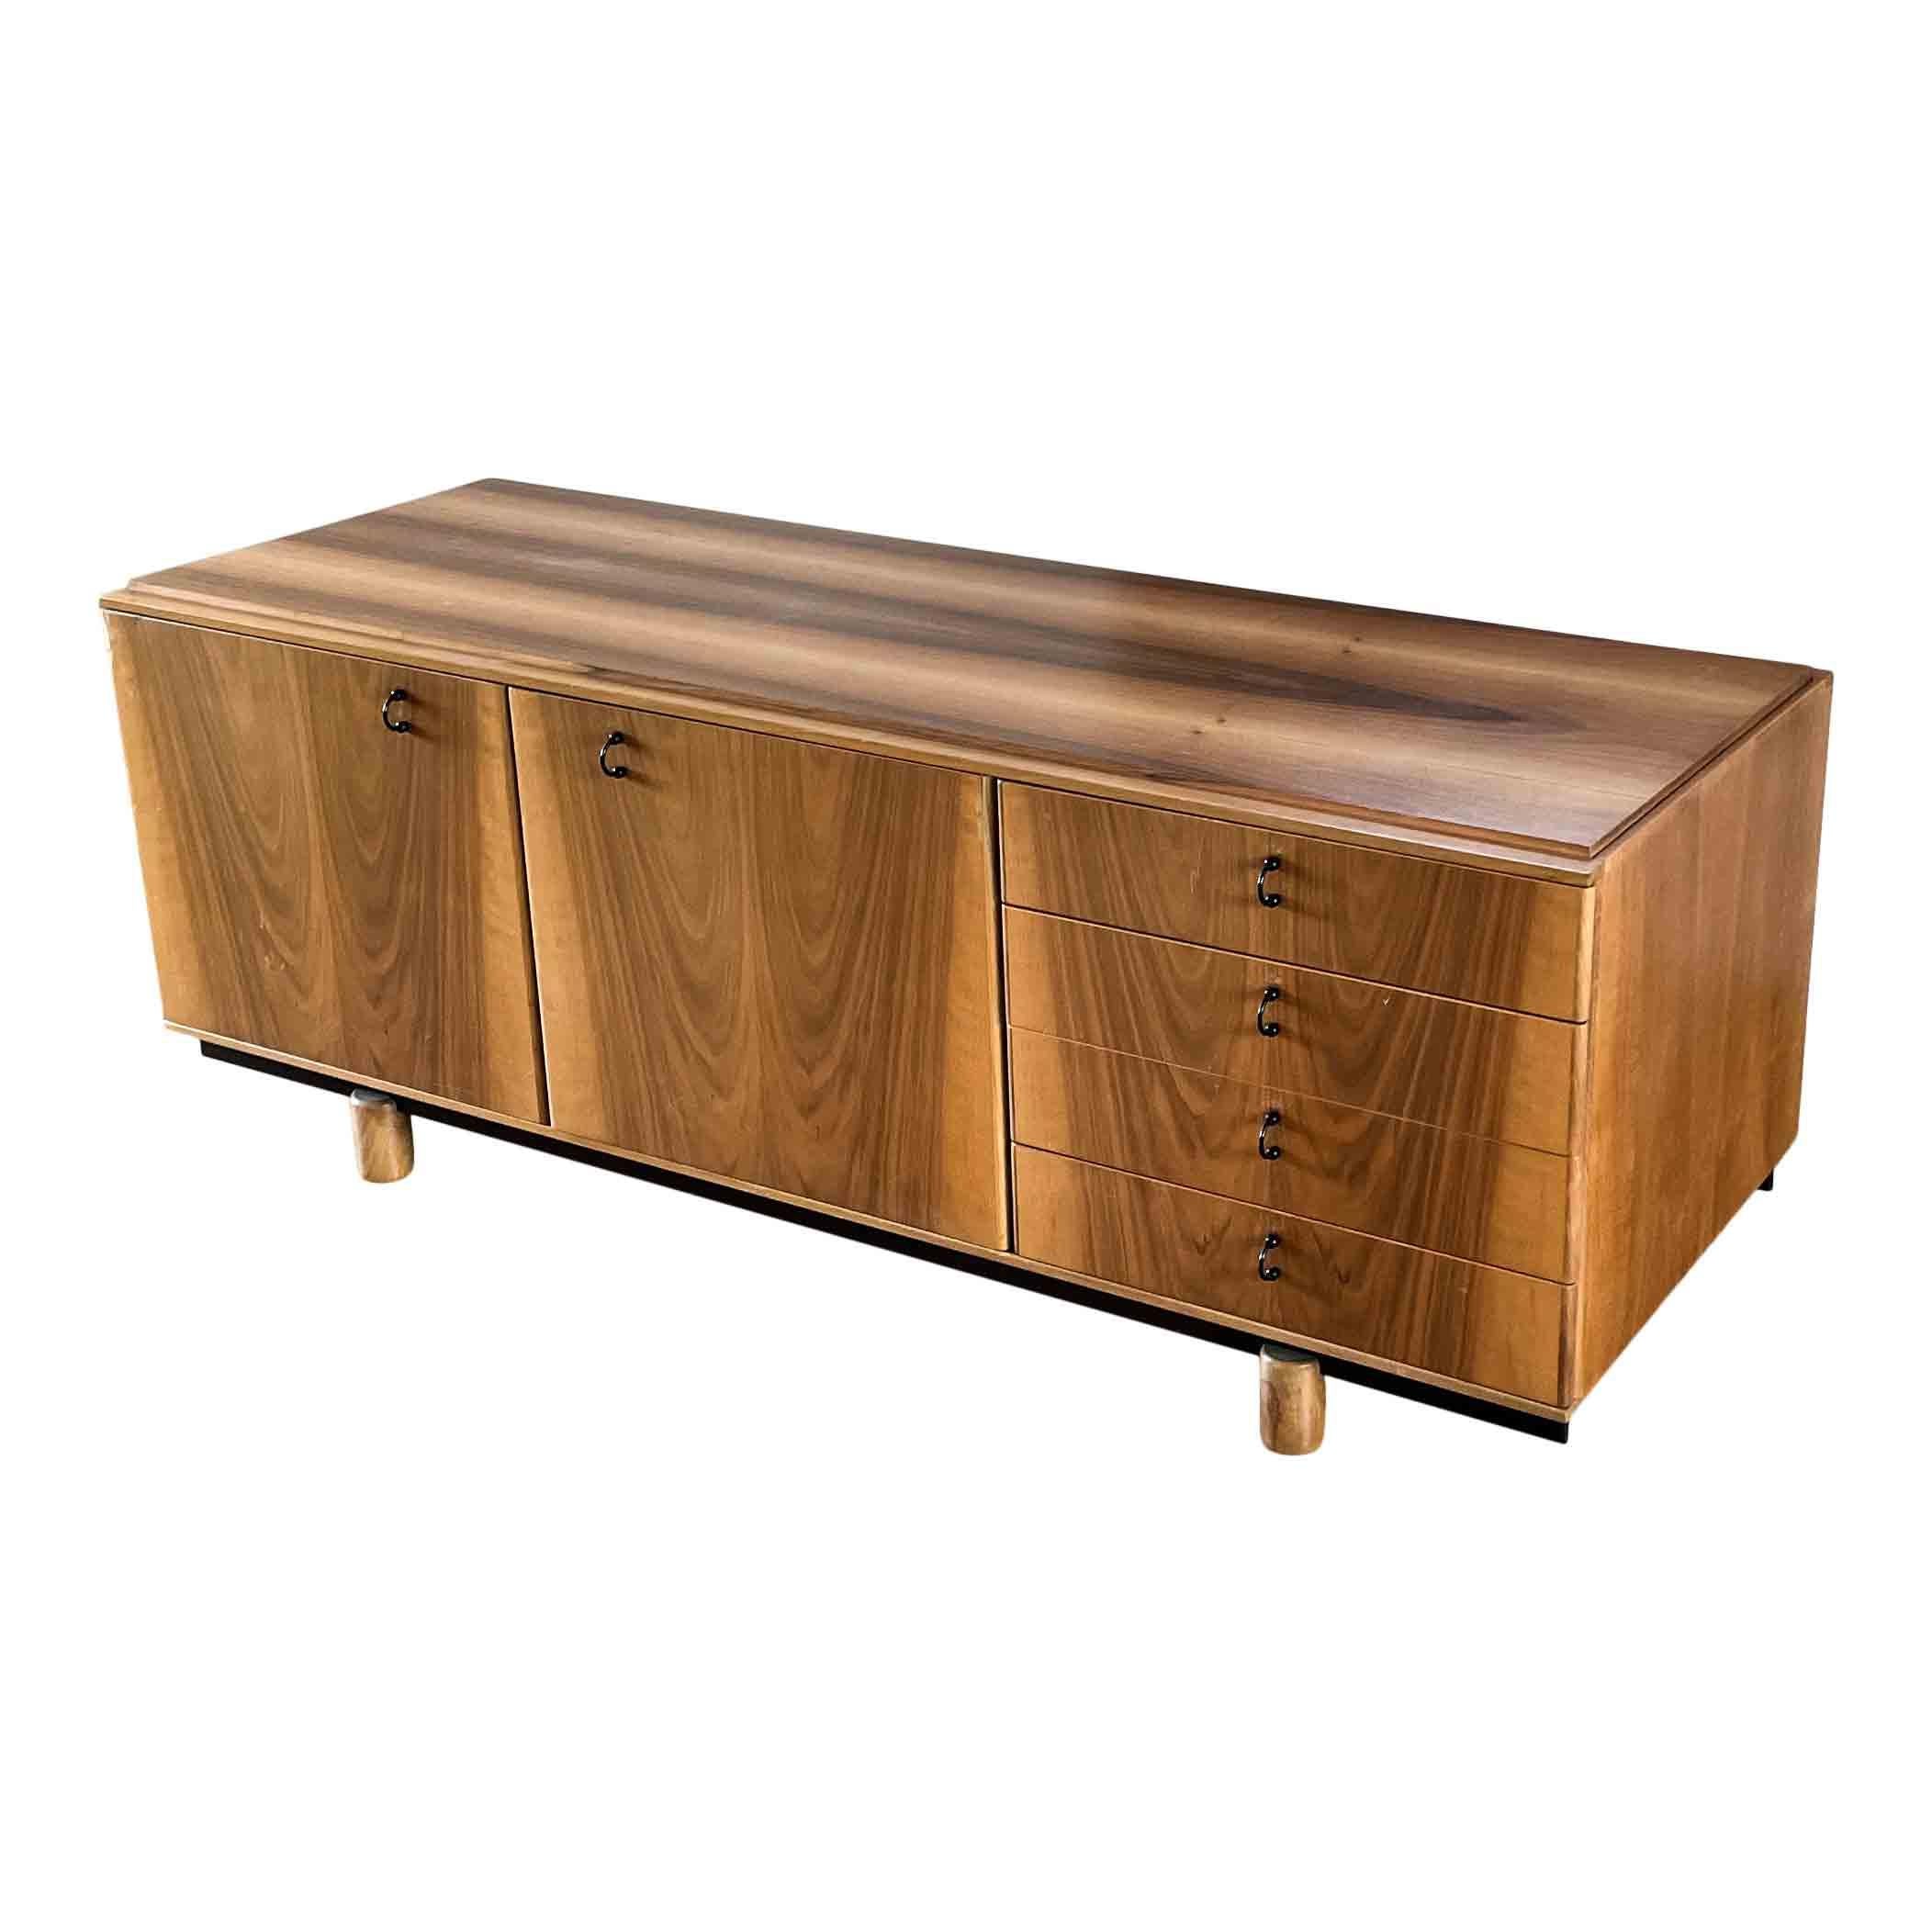 809/C sideboard, from the “Ovunque” series, designed by Gianfranco Frattini, and produced by the Italian manufacturer Bernini in 1981.

Made of walnut.

Excellent vintage condition.

Gianfranco Frattini (May 15, 1926 – April 6, 2004) was an Italian